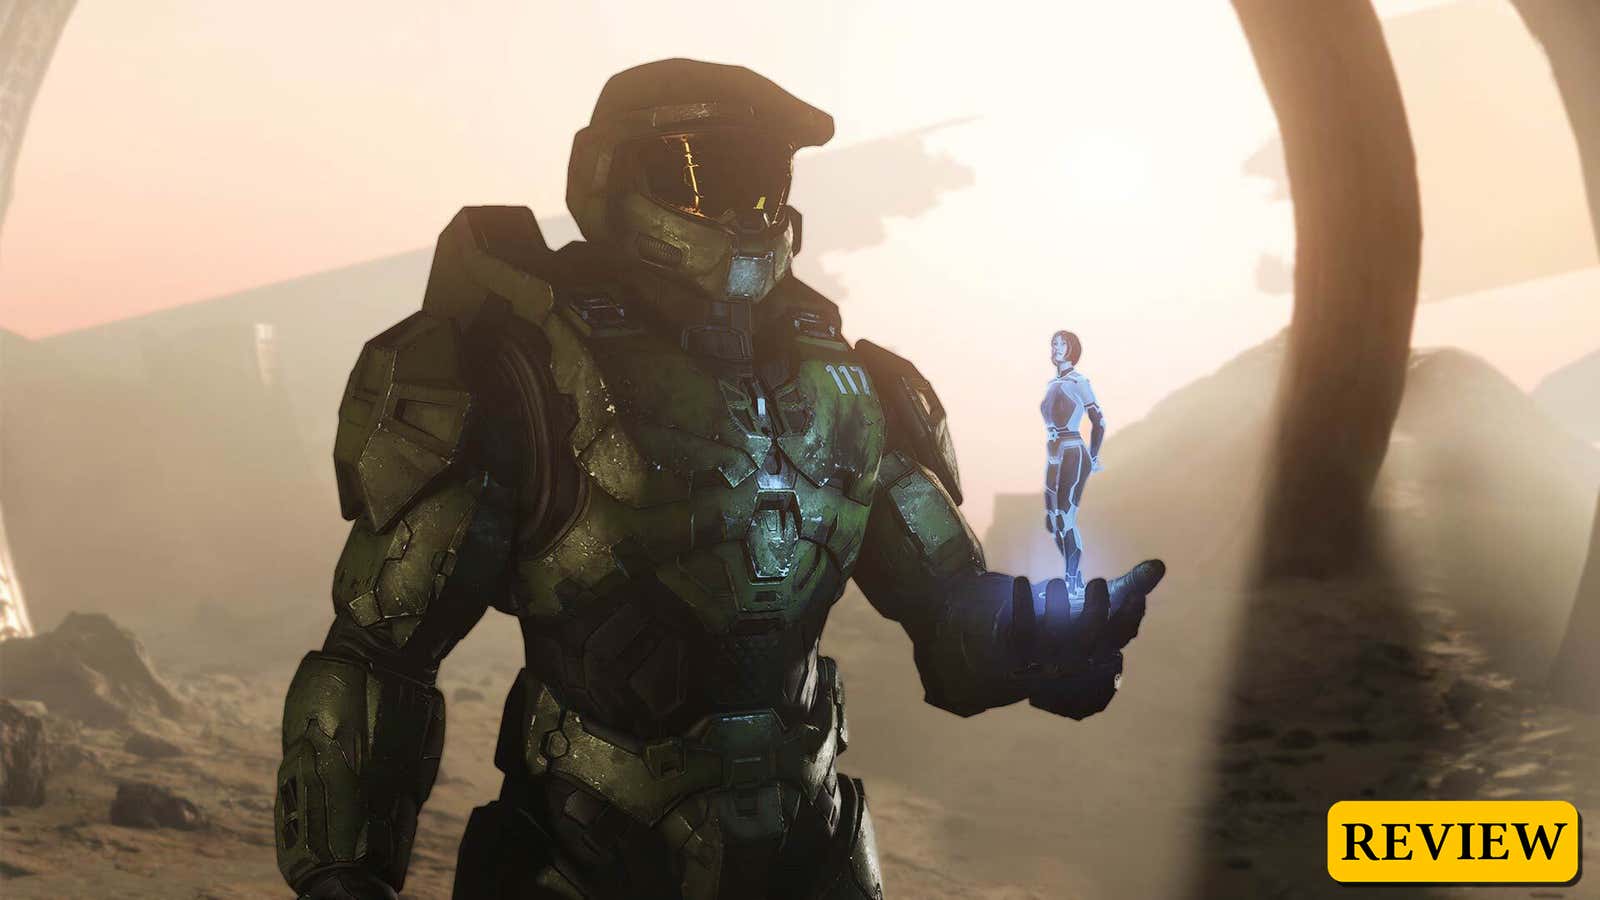 Halo Infinite Review: A Great Shooter, Still in Progress